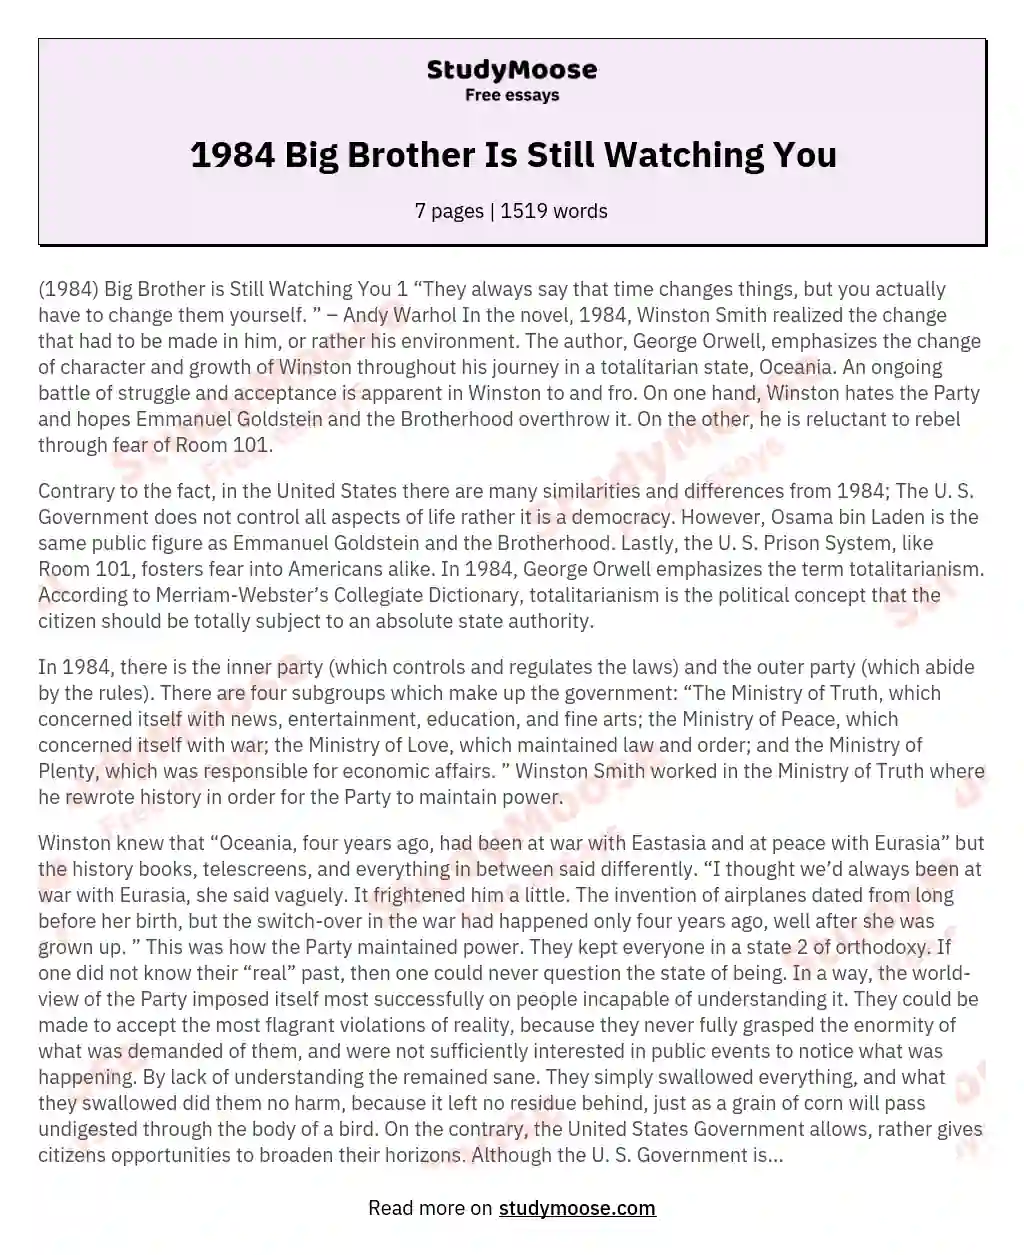 1984 Big Brother Is Still Watching You